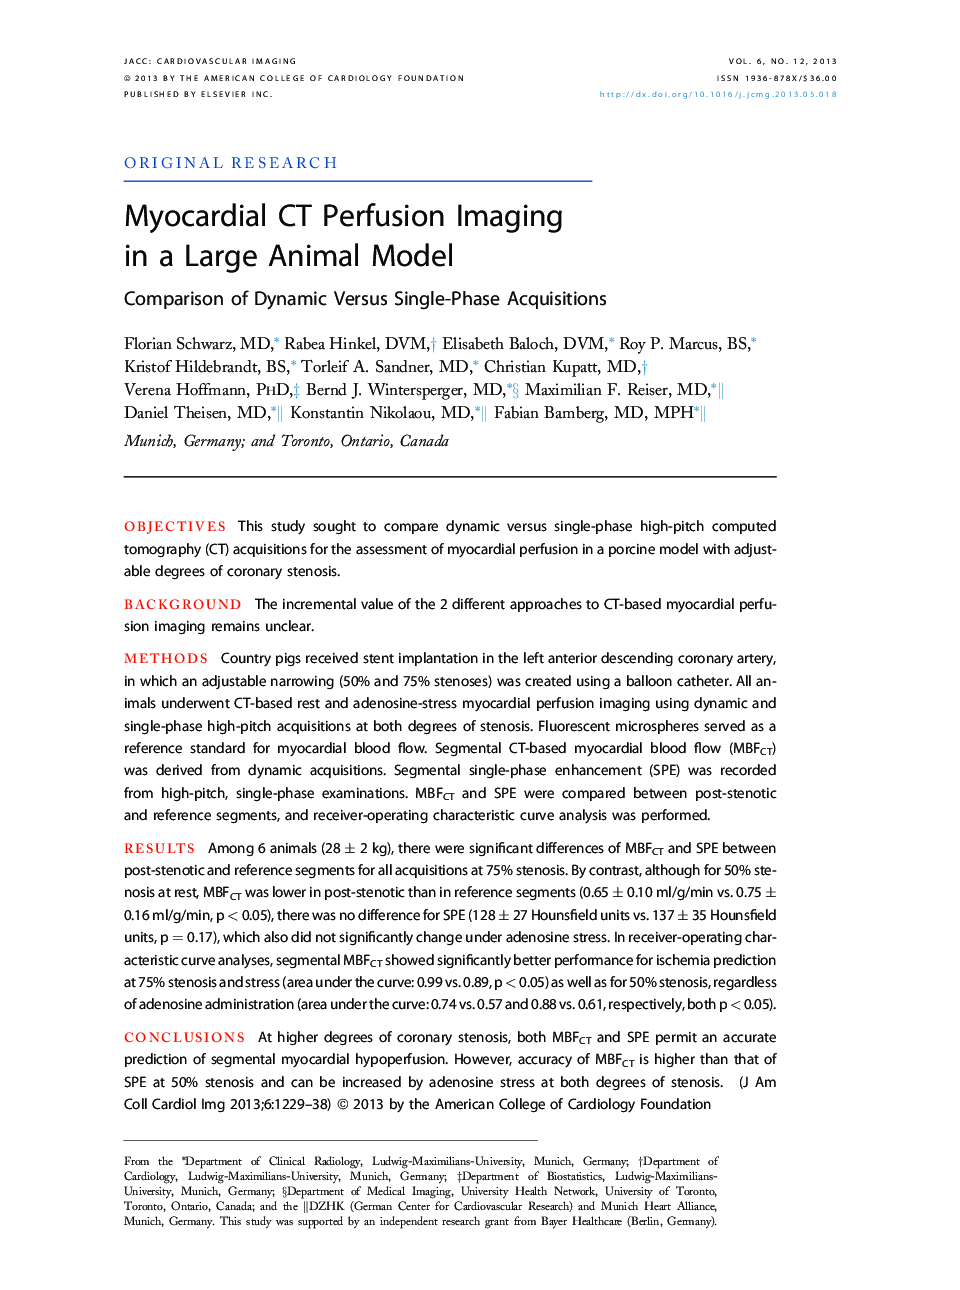 Myocardial CT Perfusion Imaging in a Large Animal Model : Comparison of Dynamic Versus Single-Phase Acquisitions